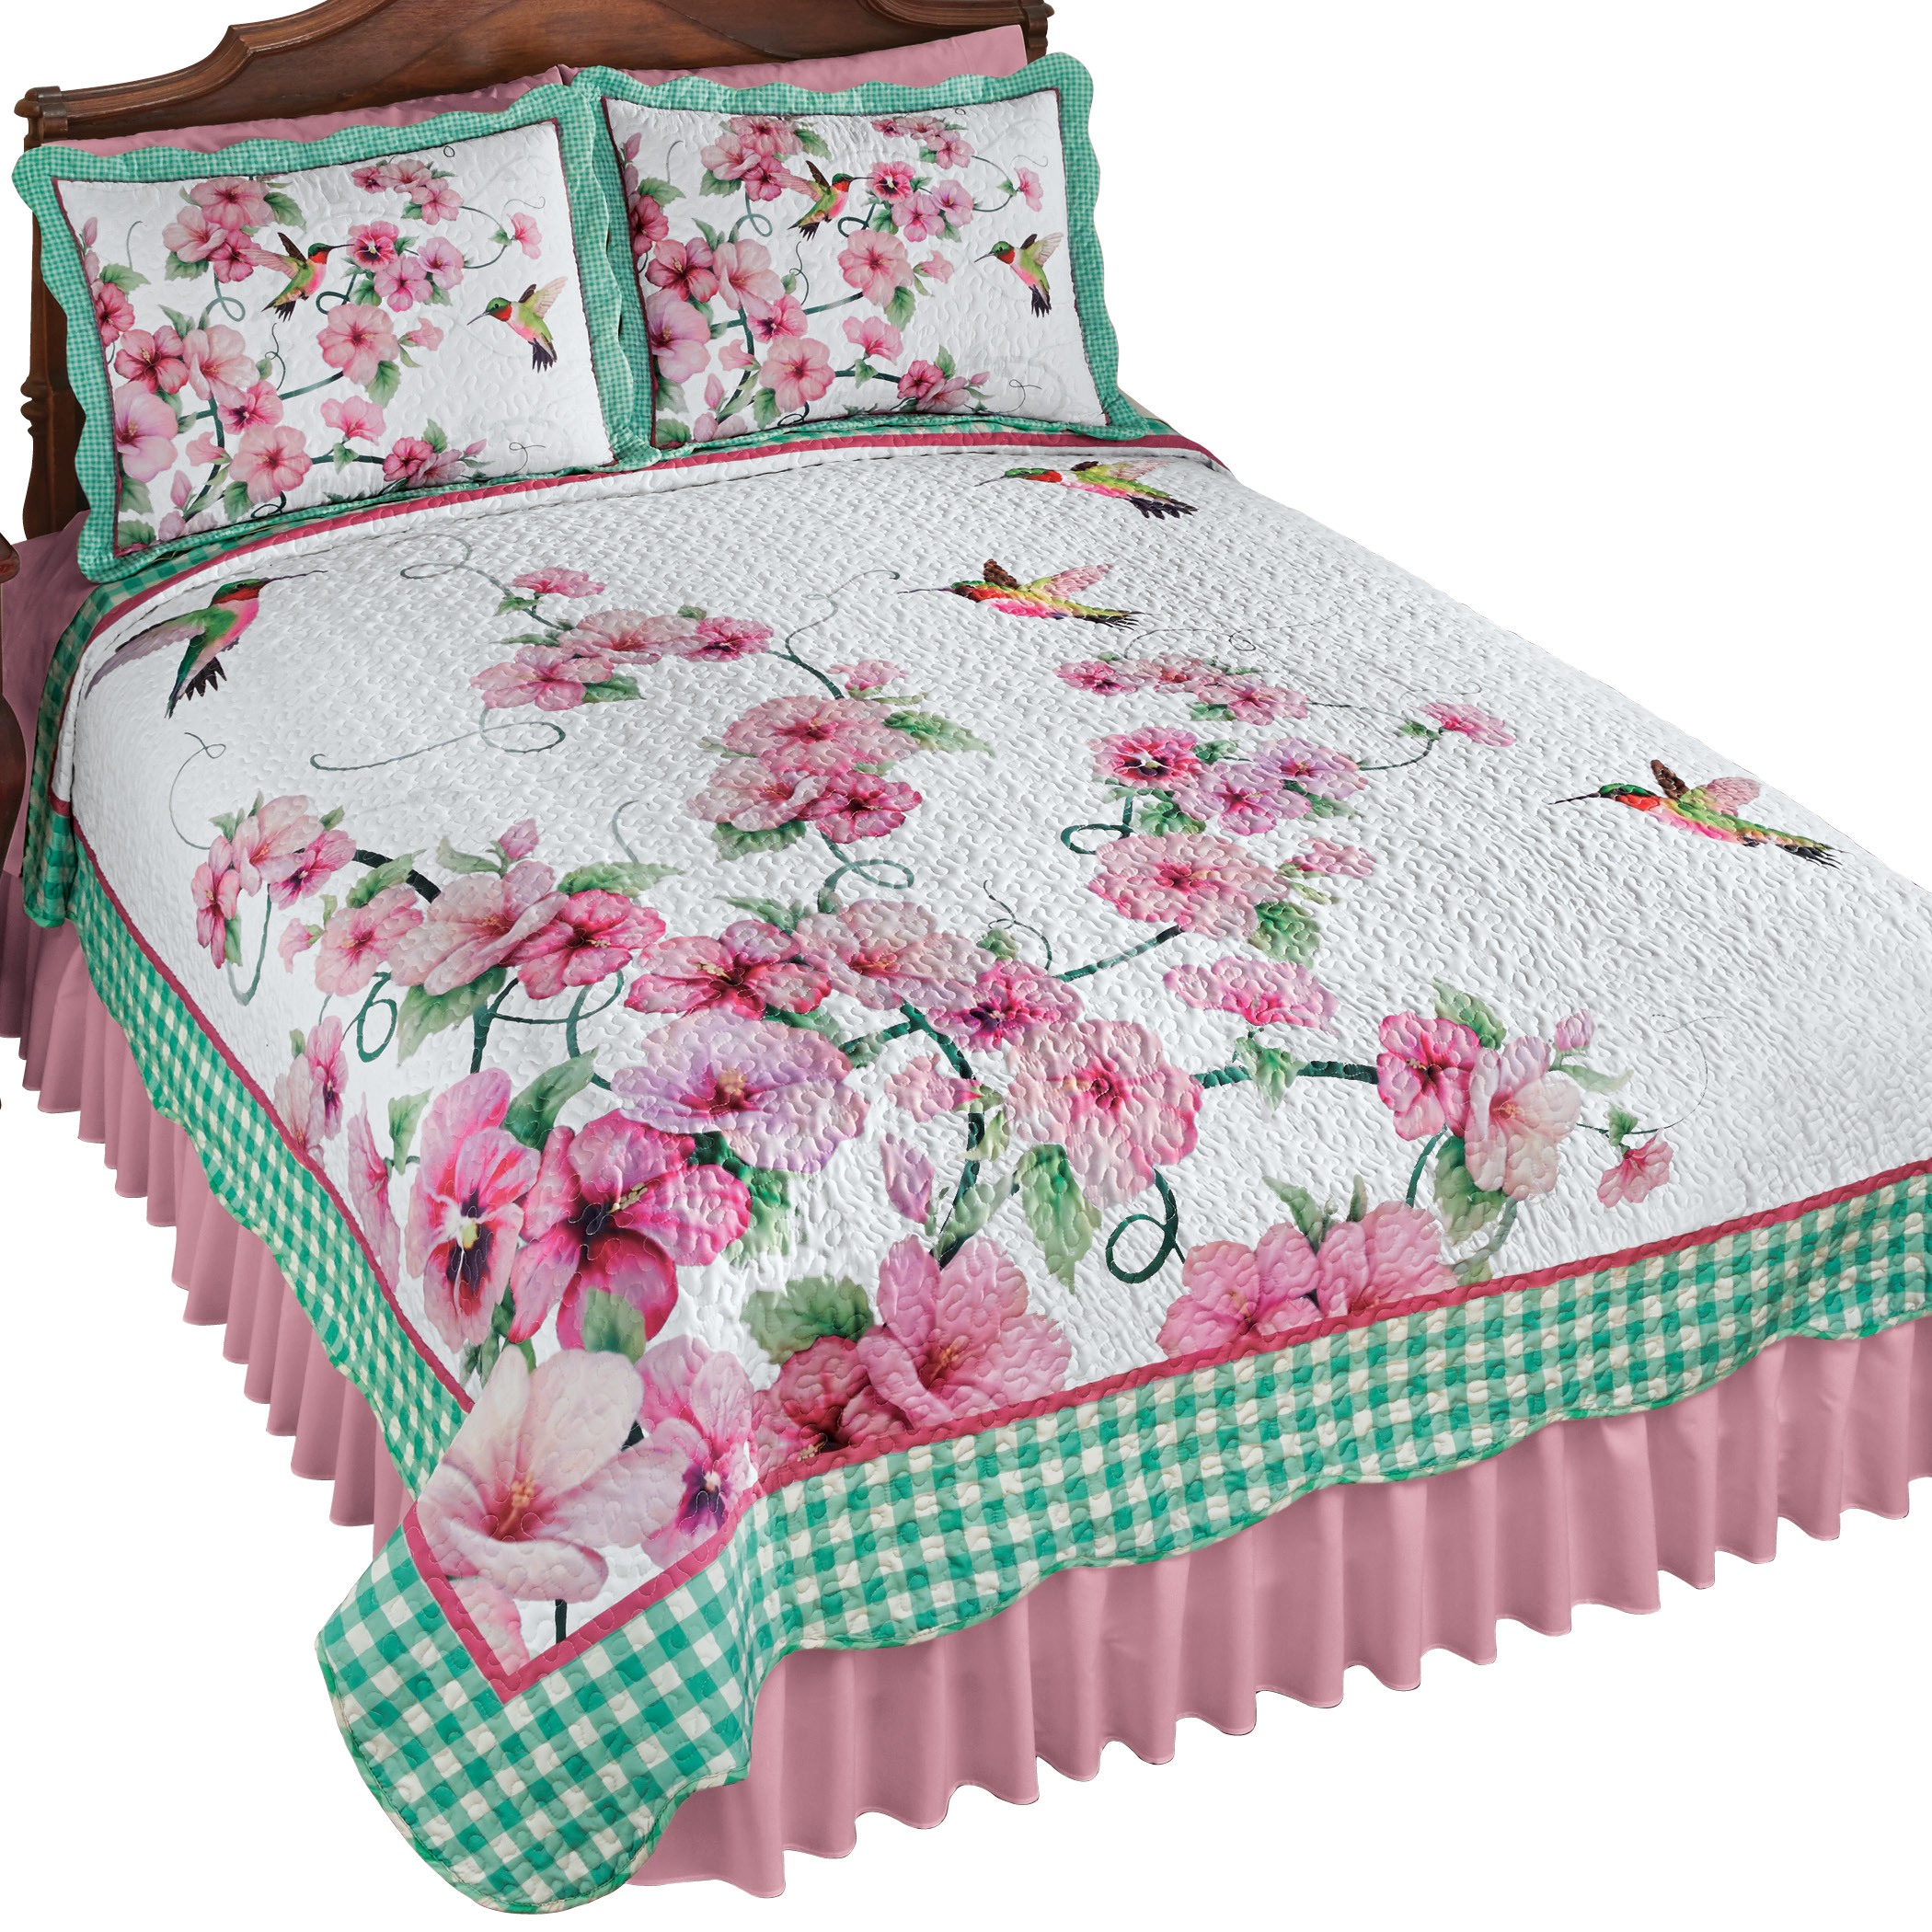 Bedroom Home D/écor Polyester Choose Twin Blooming Pink Roses Floral Bouquet Quilt King Machine Wash Full//Queen